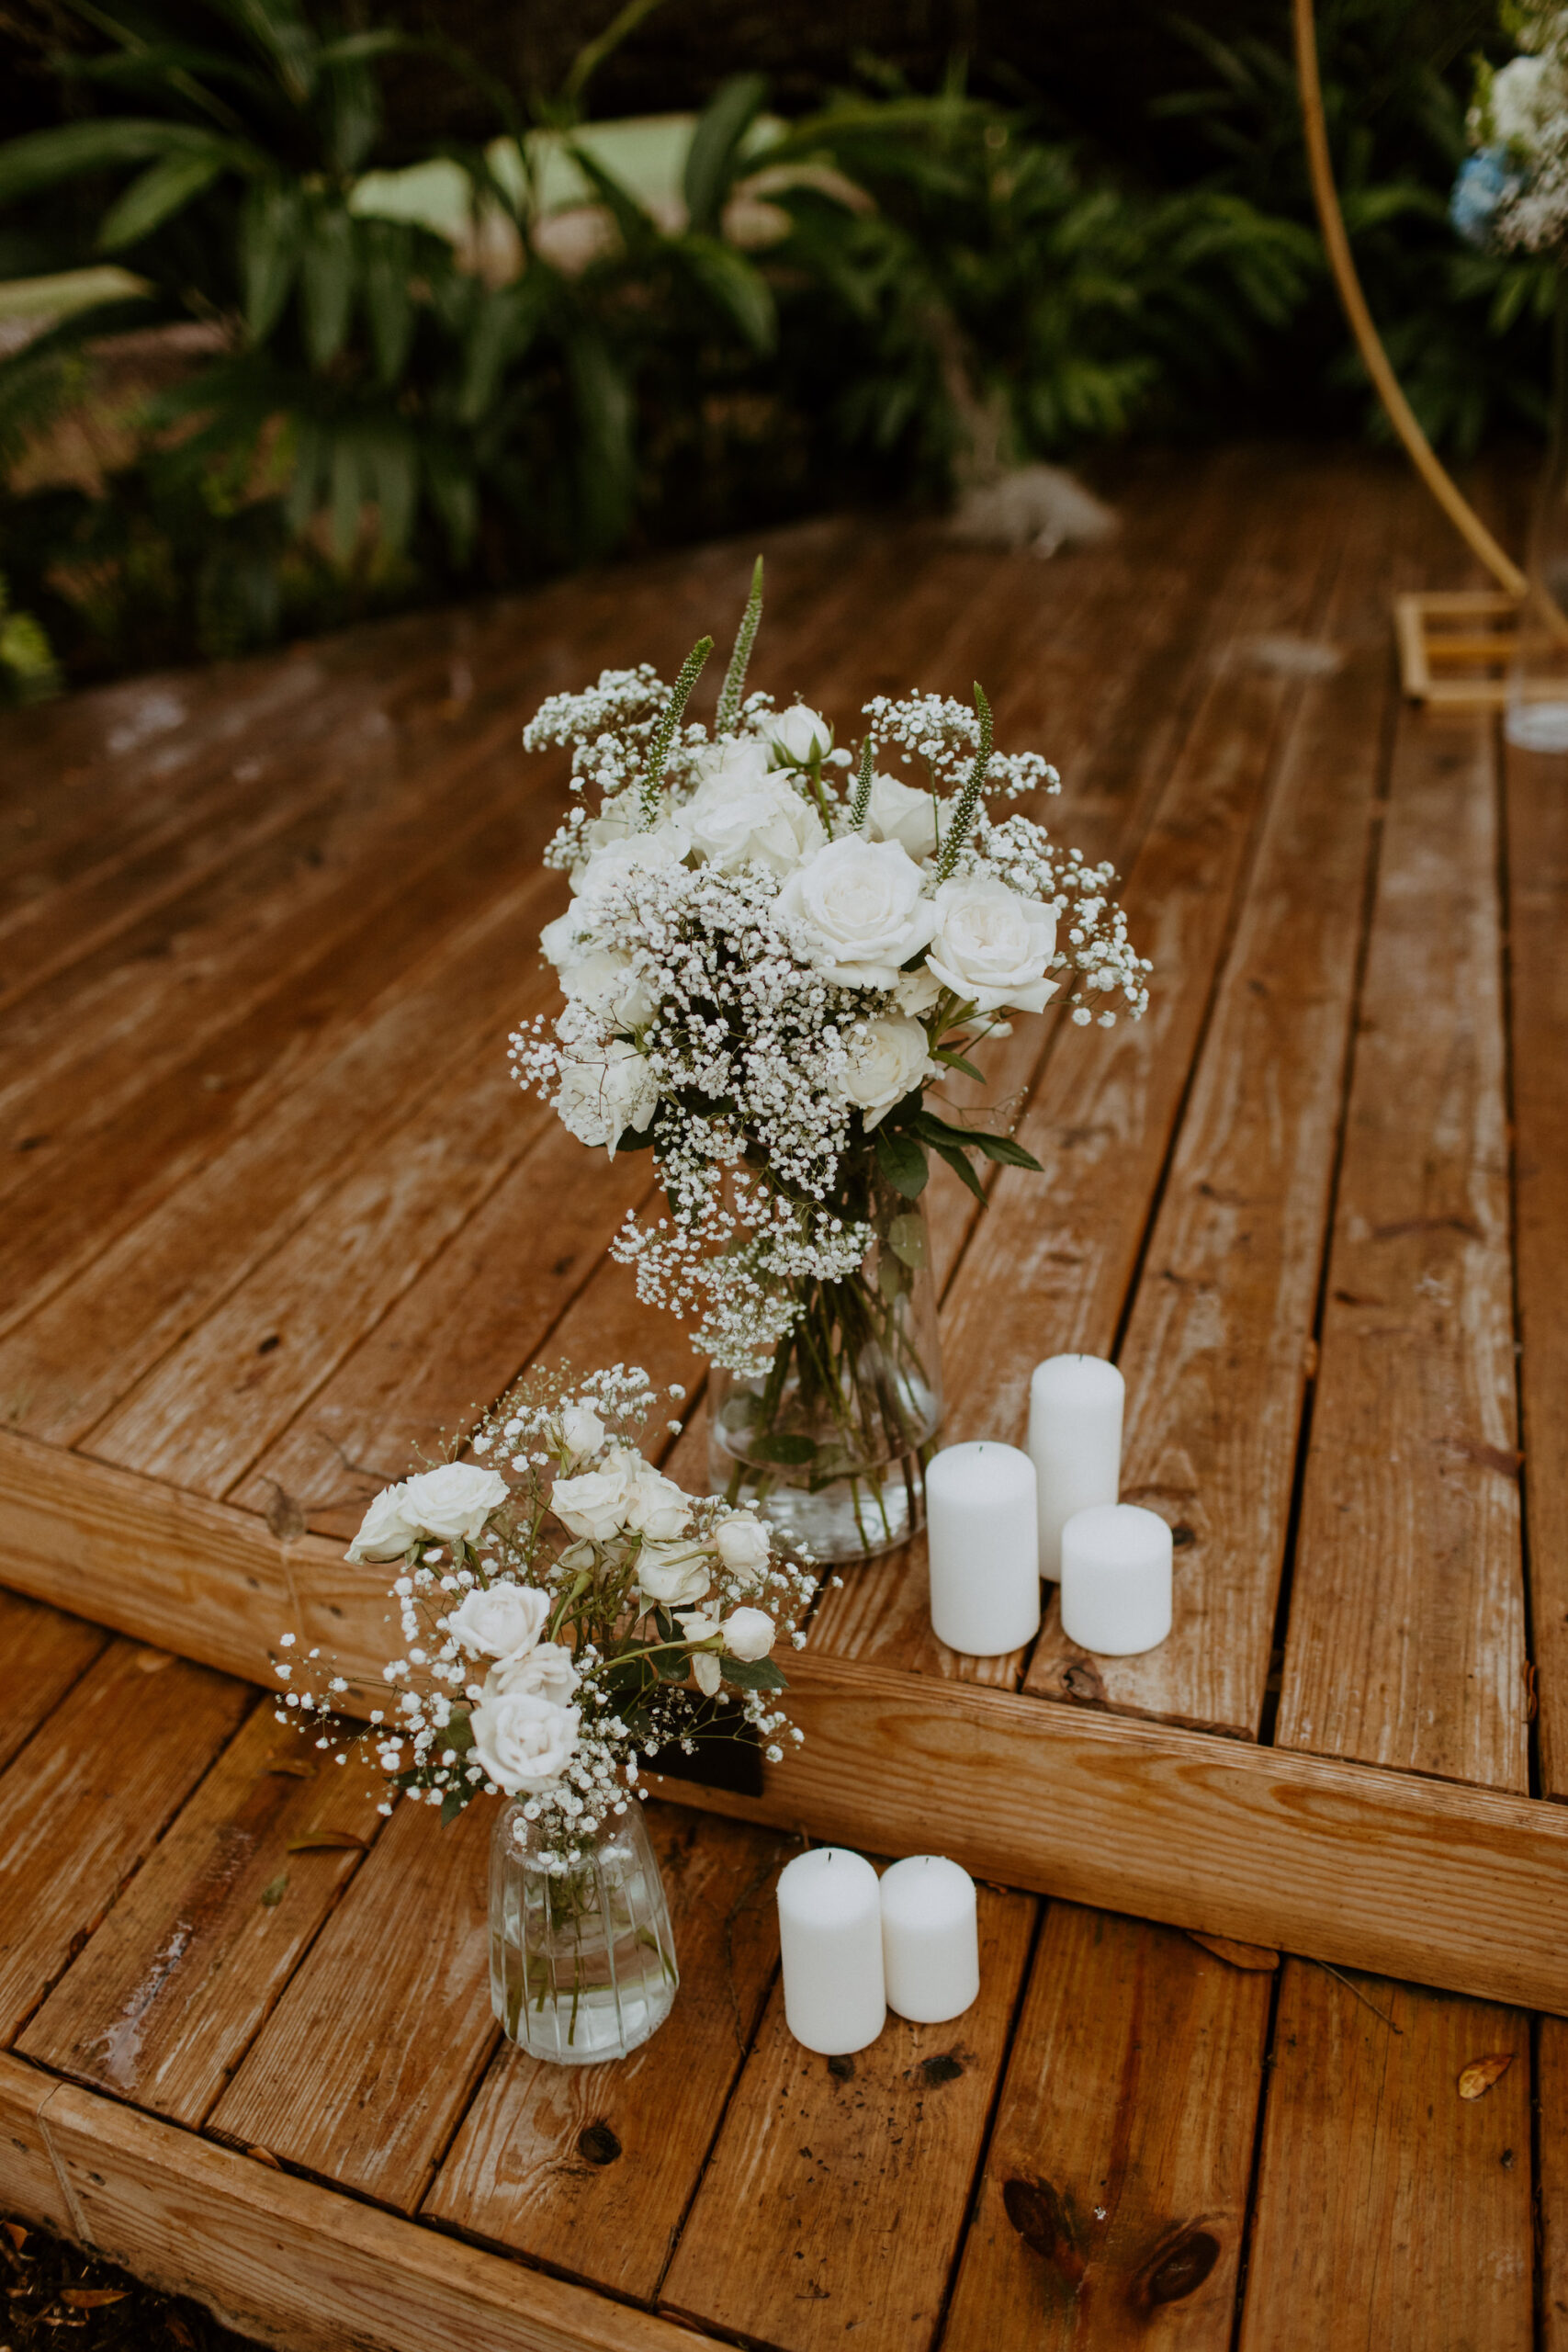 White Baby's Breath, Rose, and Candle Minimalist Wedding Altar Decor